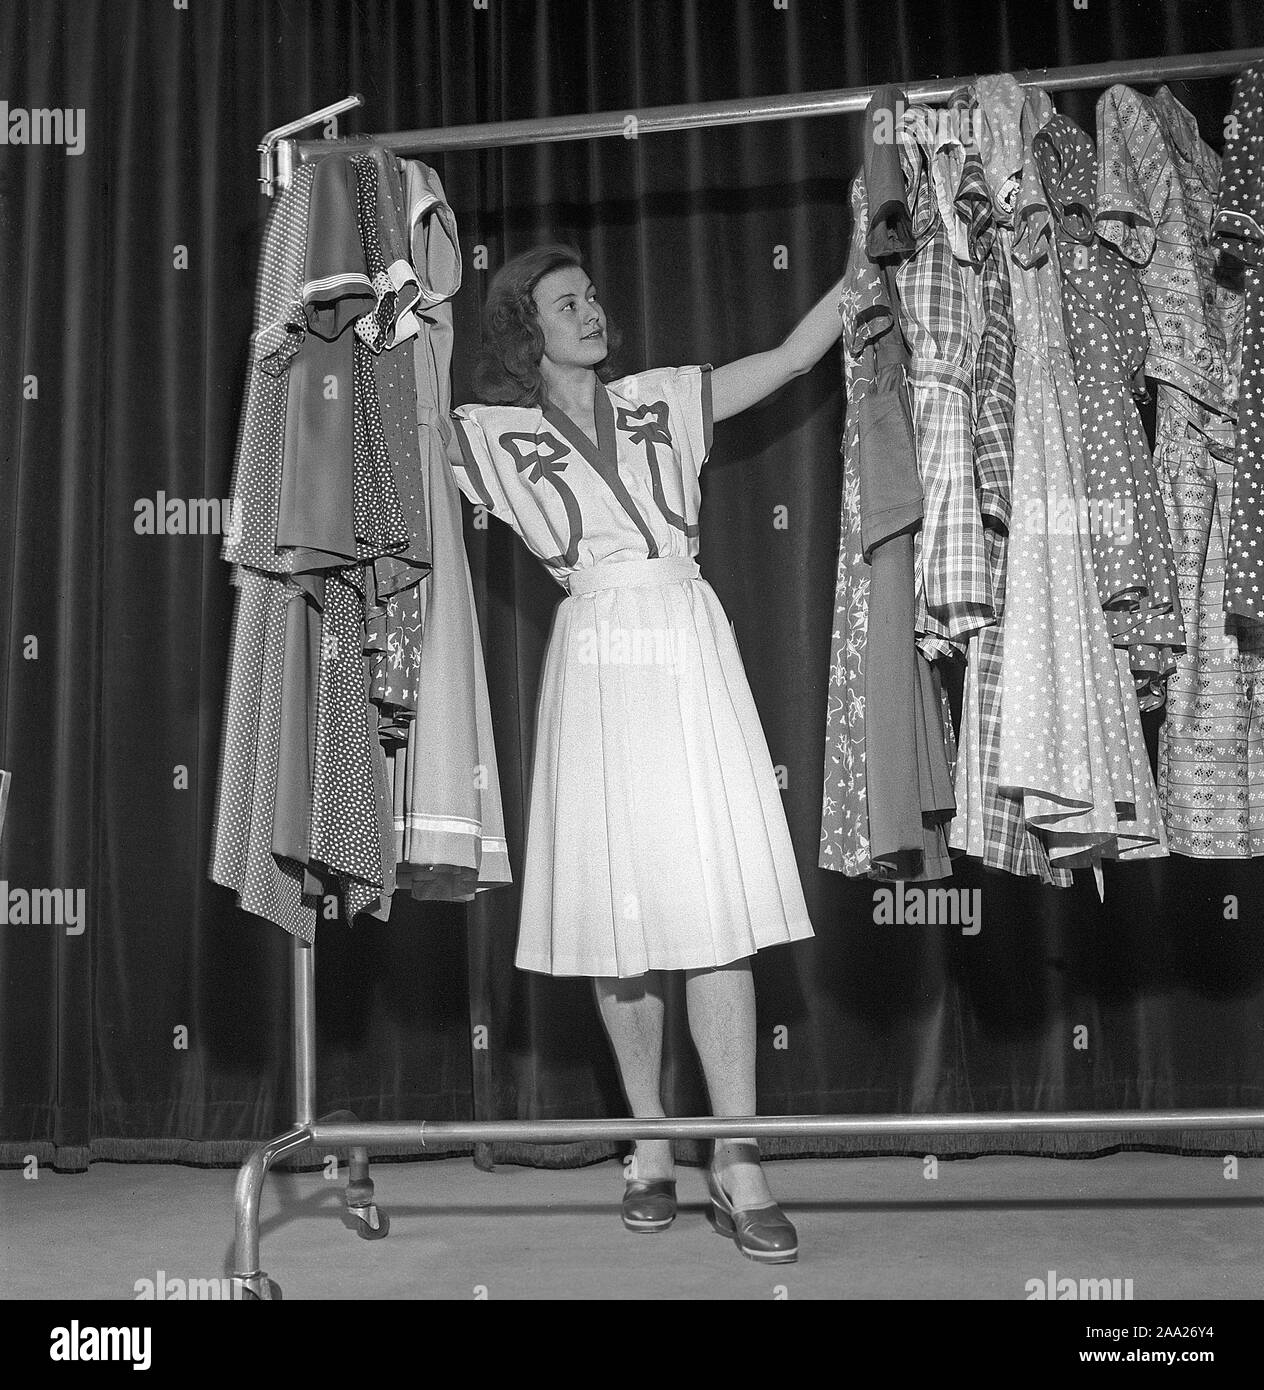 Women's fashion in the 1940s. A young woman in a typical 1940s outfit is standing and looking at different summer dresses. Sweden 1945 Kristoffersson Ref R129-1 Stock Photo